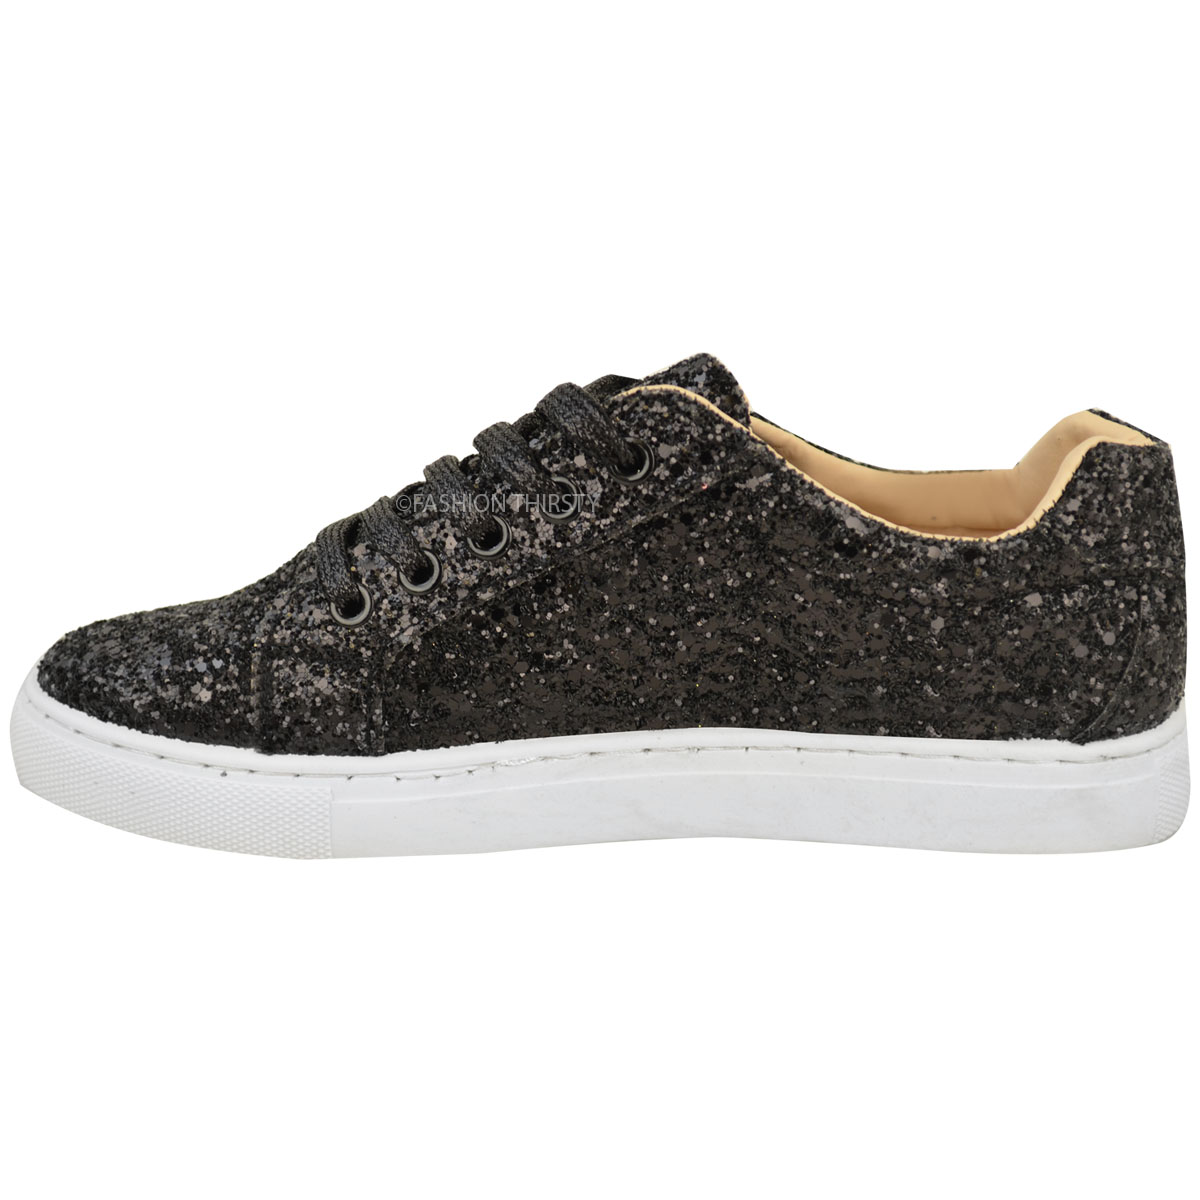 womens sneakers with glitter 7a0b47